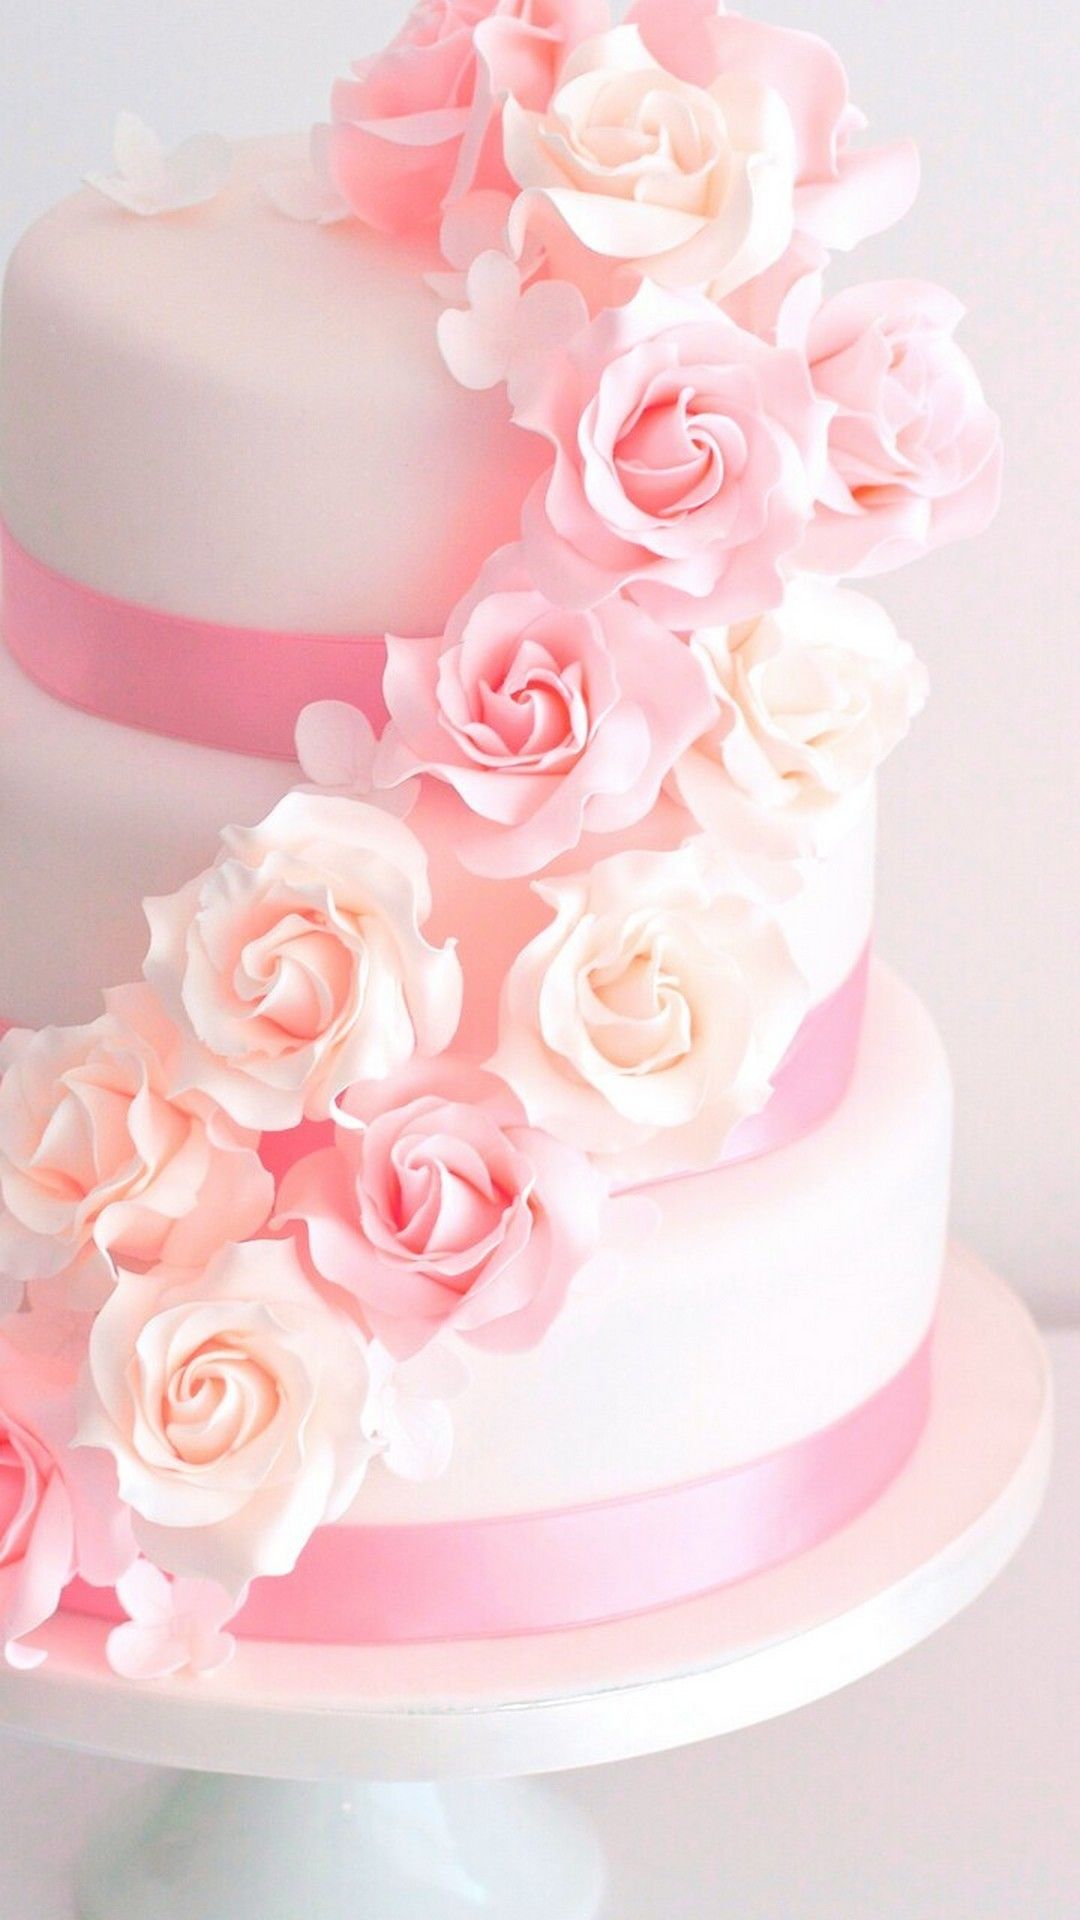 Cake Image Wallpaper Android Android Wallpaper